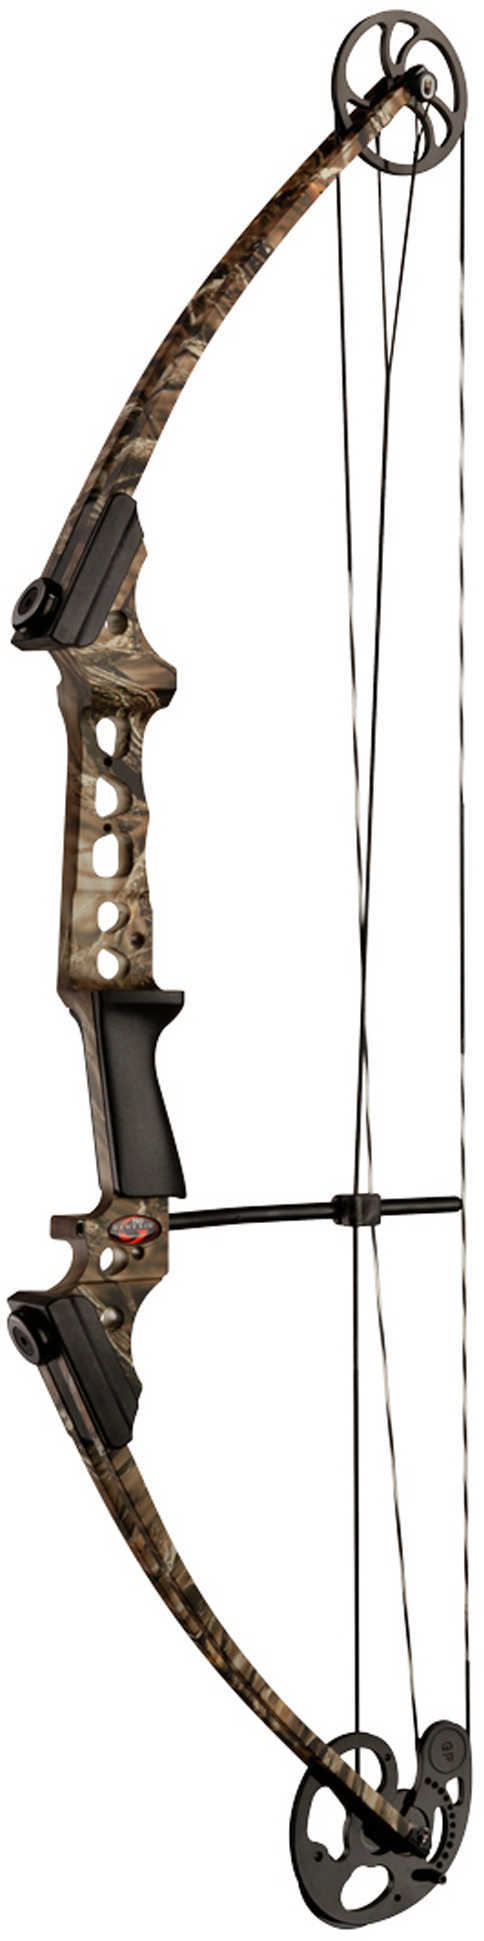 Genesis Pro Bow Right handed, Camo Lost 12238